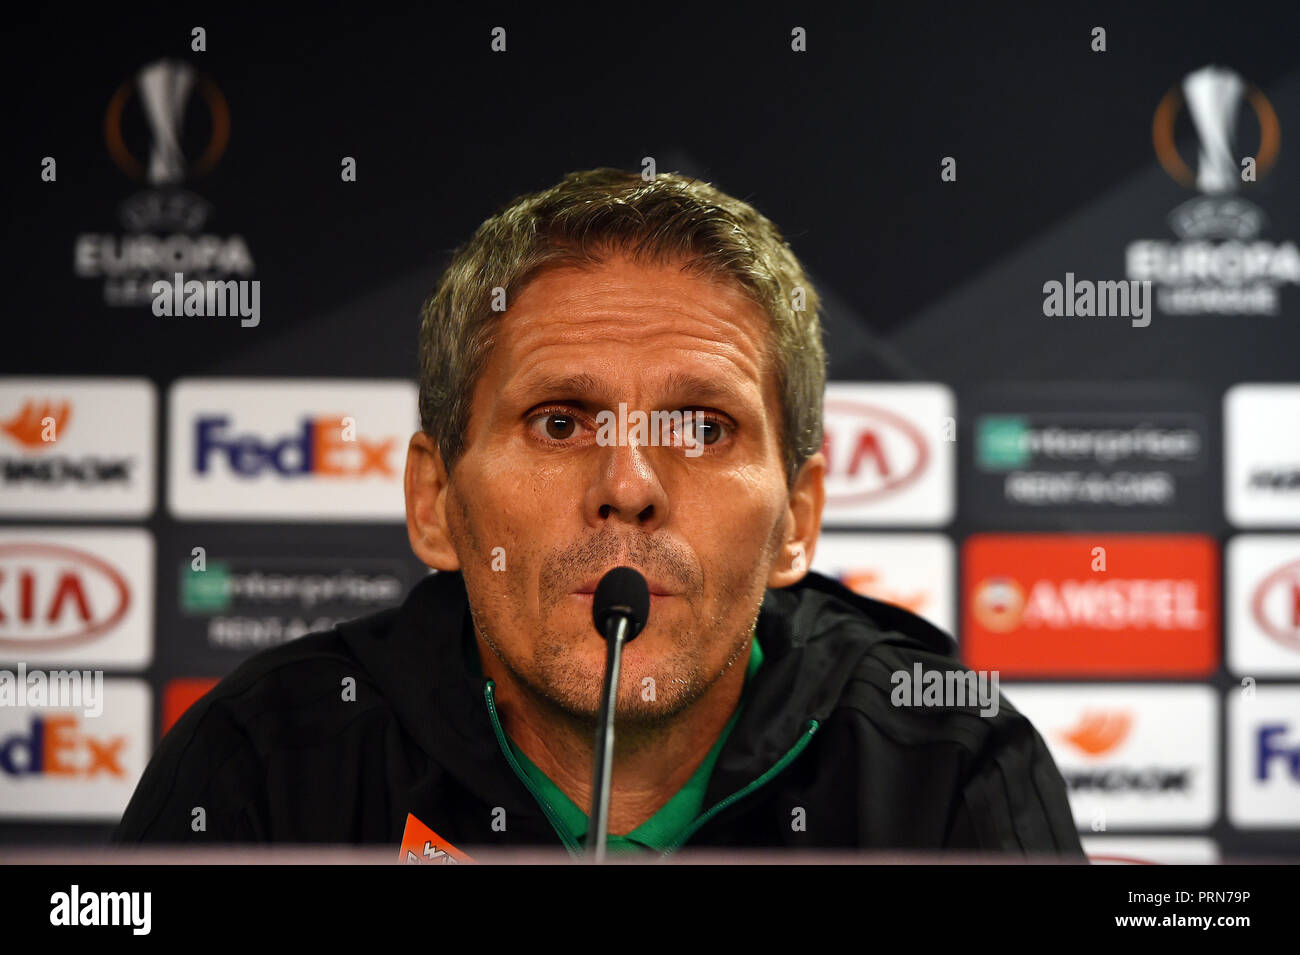 Glasgow, Scotland. Wednesday 3rd October 2018.   Rapid Wein manager Dietmar KŸhbauer addresses the media at a press conference ahead of their Europa League Matchday 2 match against Glasgow Rangers at Ibrox Stadium, Glasgow, Scotland on Wednesday 3rd October 2018 2018.   Picture Andy Buchanan Credit: Andy Buchanan/Alamy Live News Stock Photo